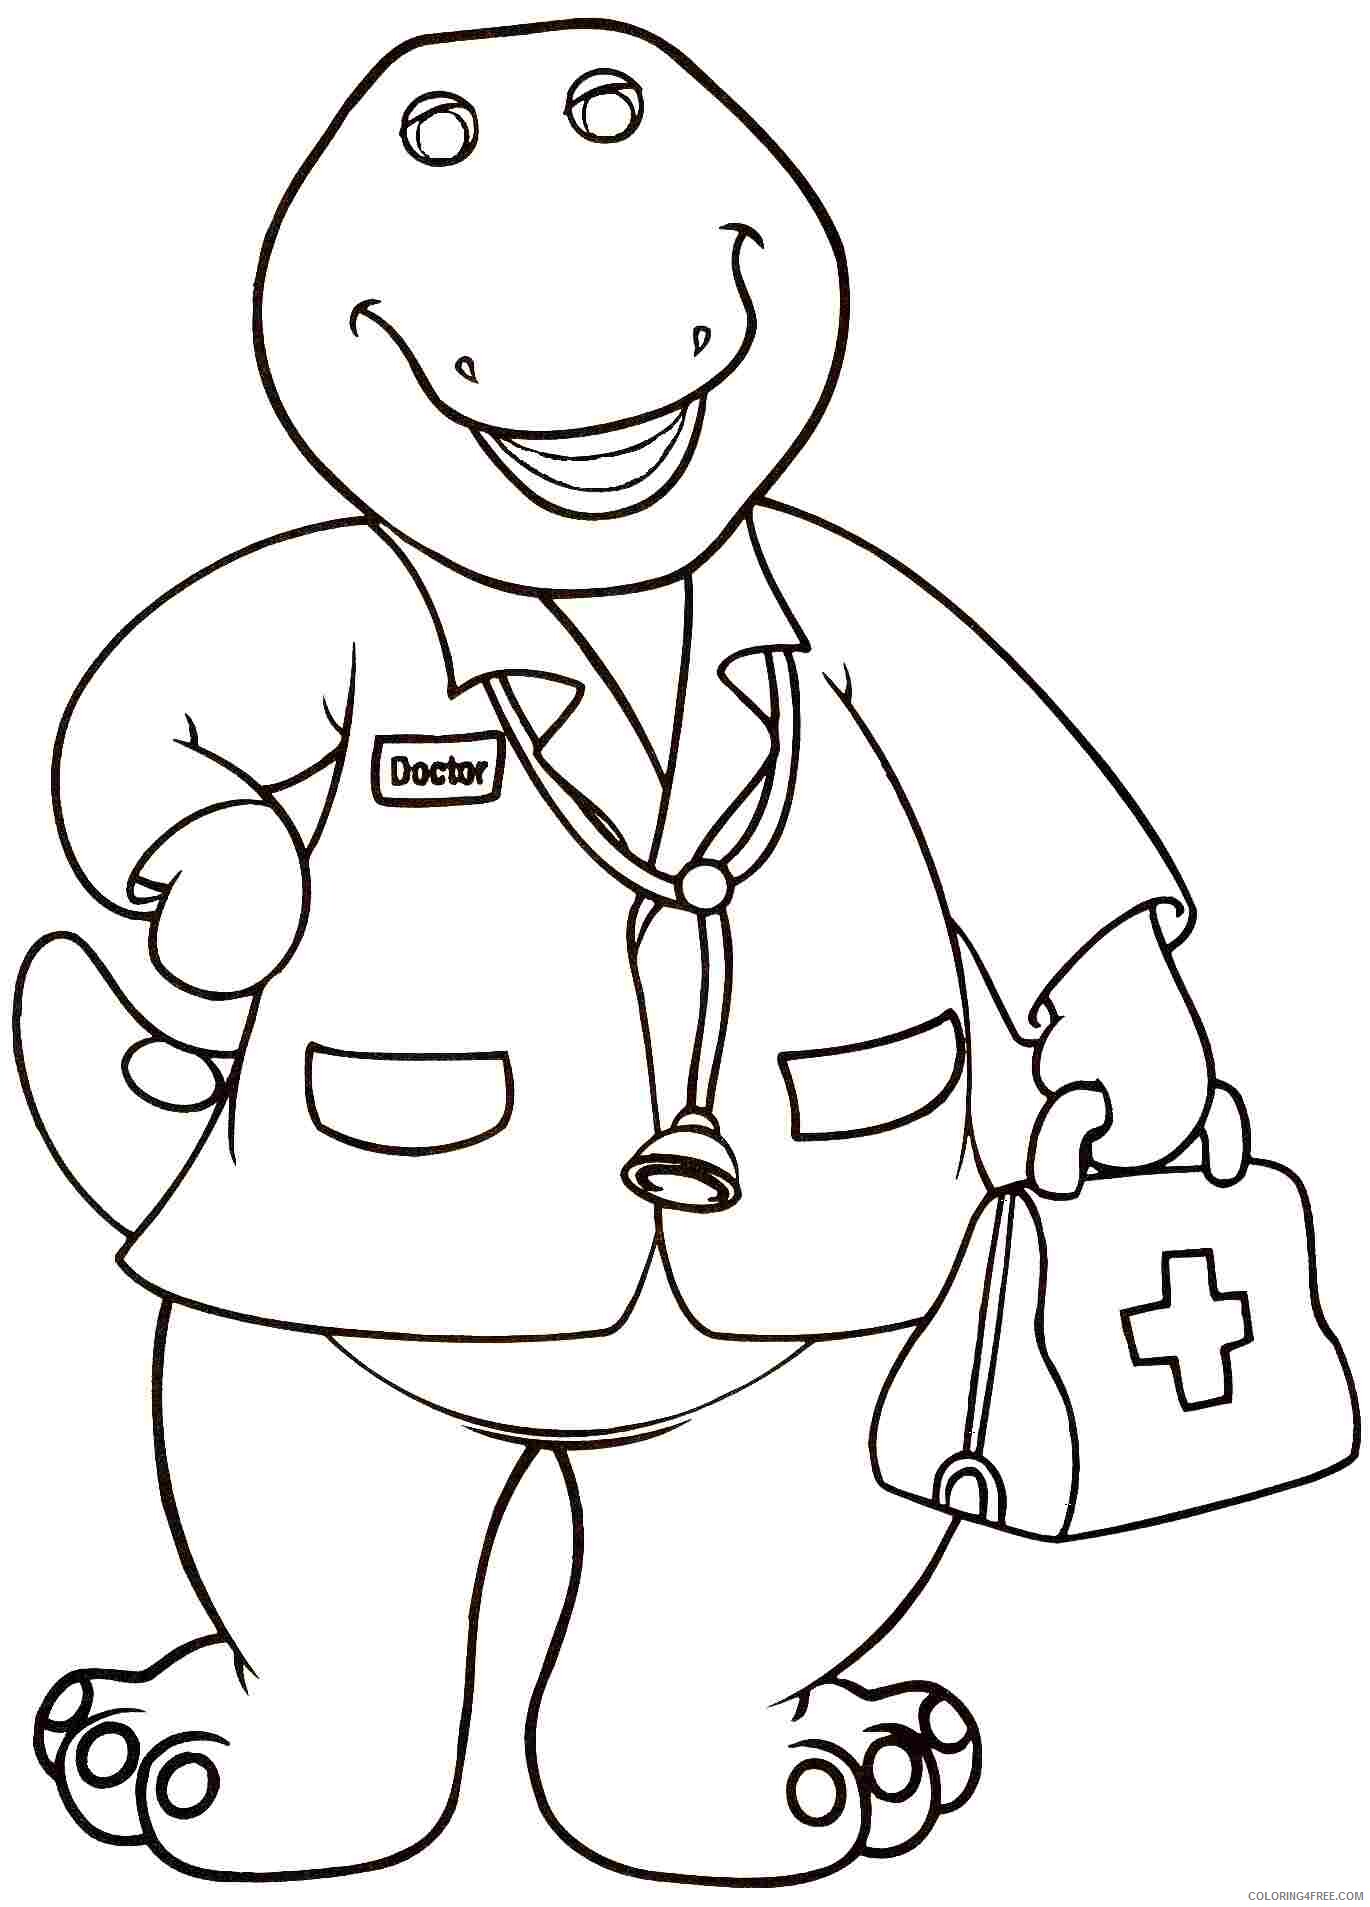 Barney and Friends Coloring Pages TV Film Free Barney Printable 2020 00690 Coloring4free